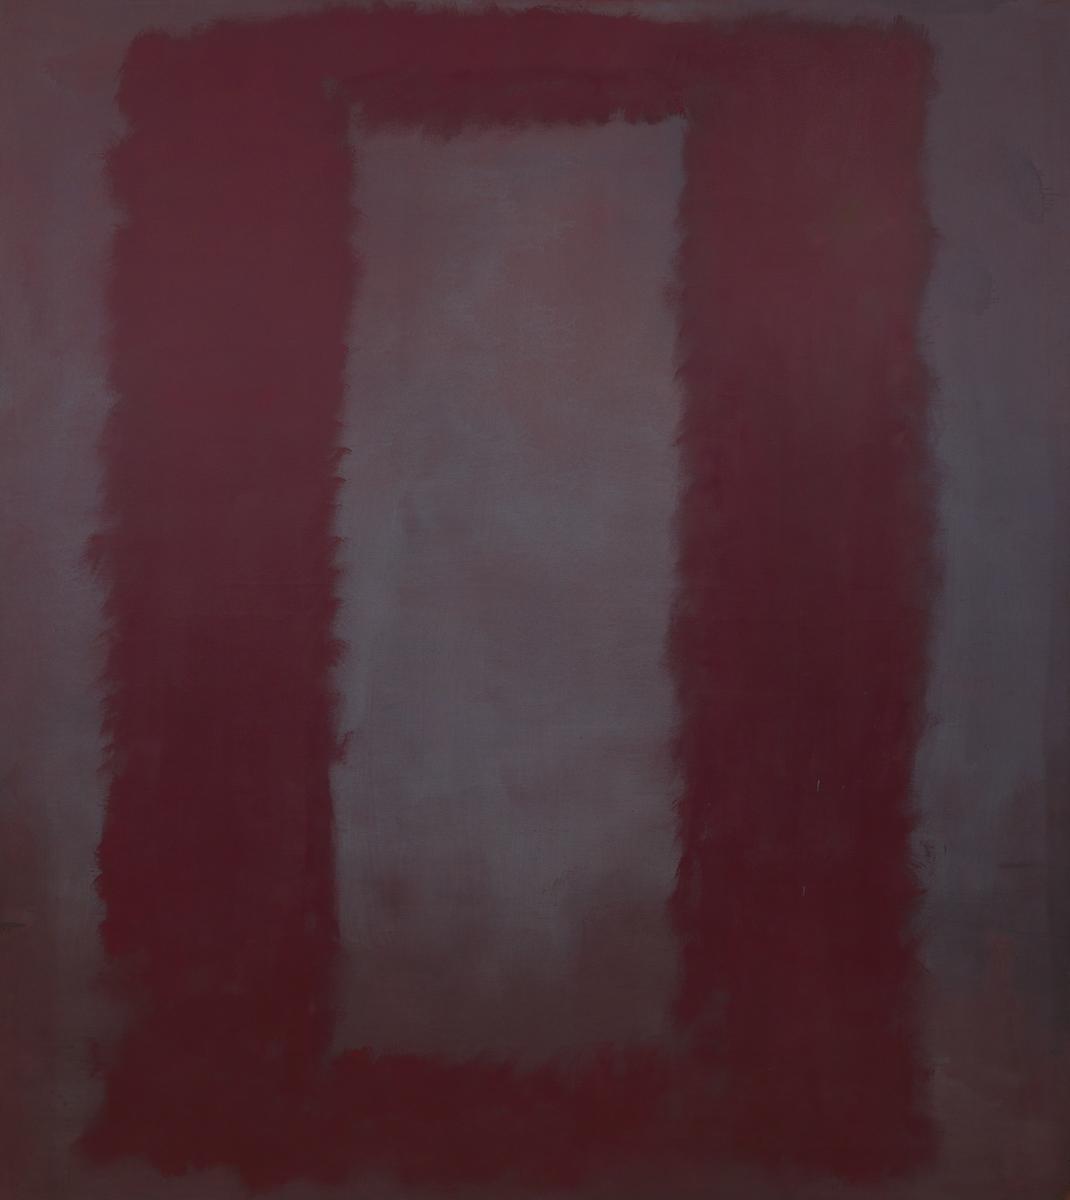 The first retrospective in France dedicated to Mark Rothko, at the